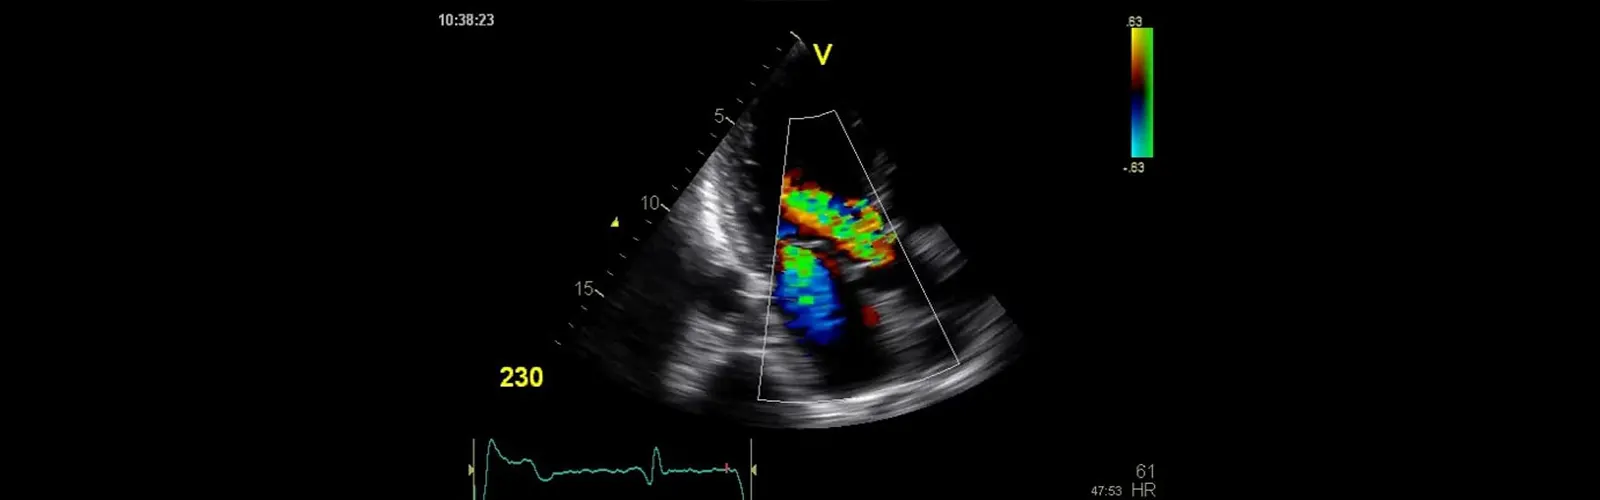 What is the Meaning of Colors in Color Doppler Ultrasound?